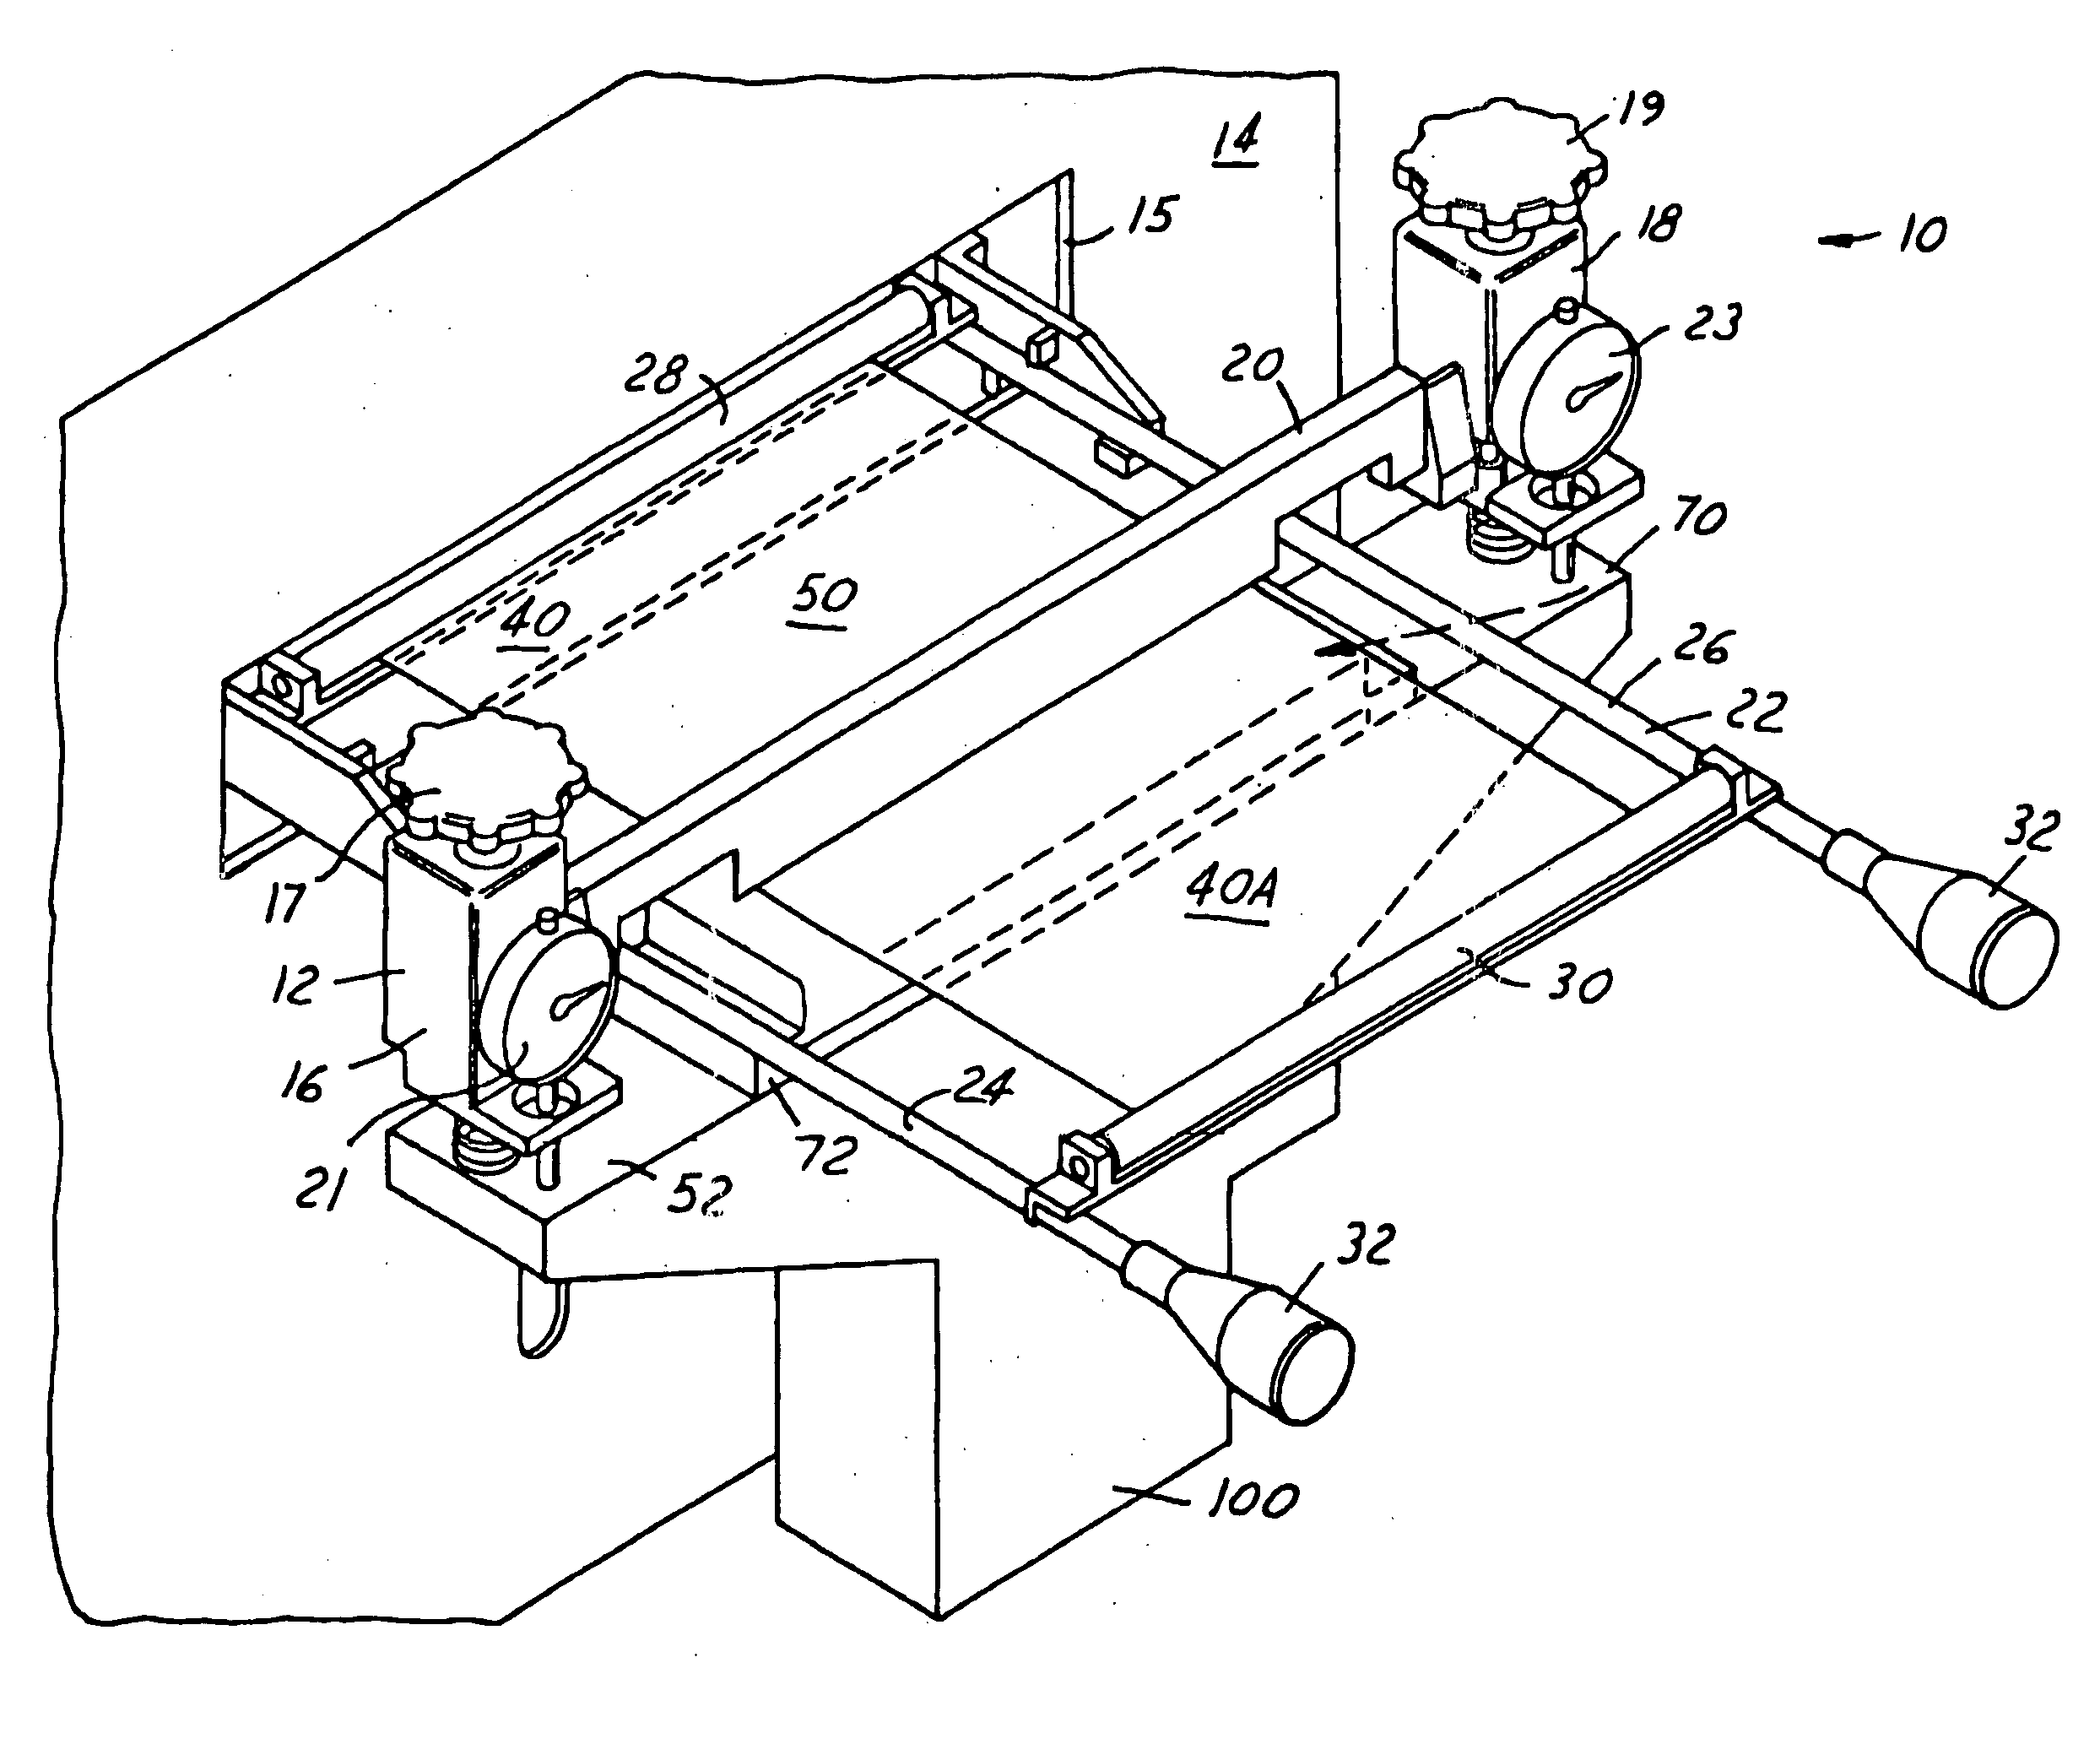 Method and apparatus for producing a uniform film on a substrate